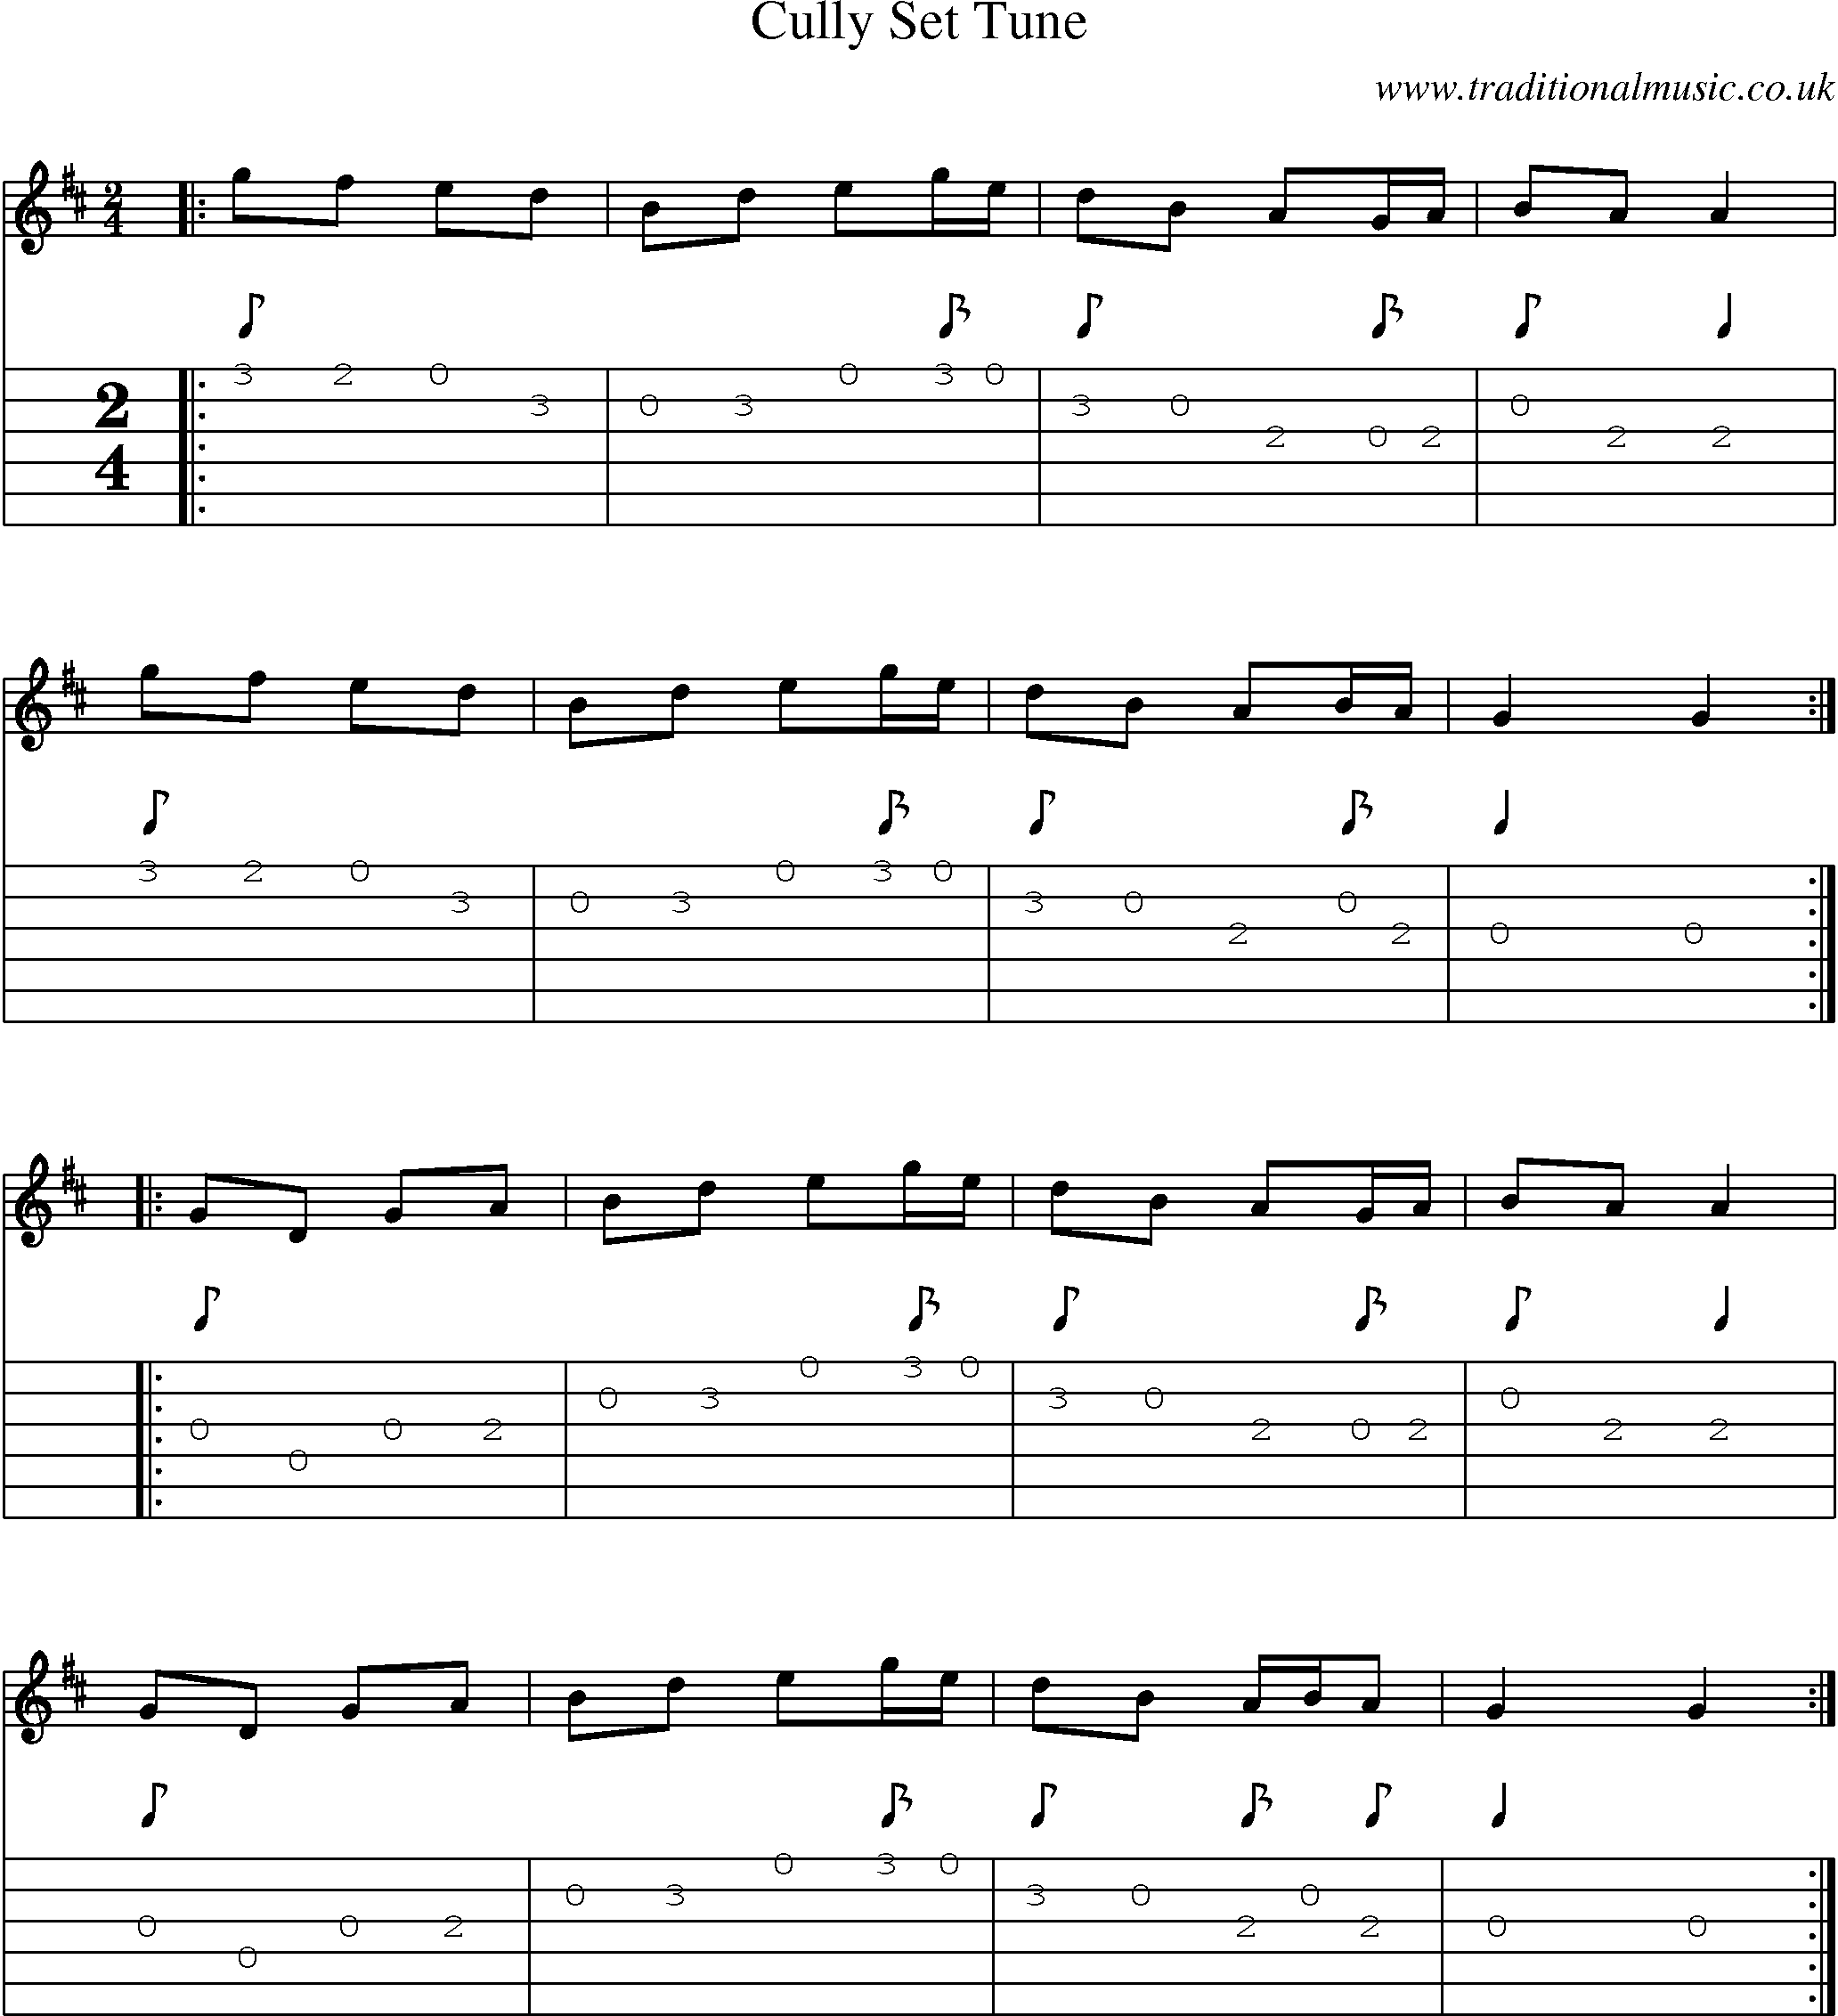 Music Score and Guitar Tabs for Cully Set Tune